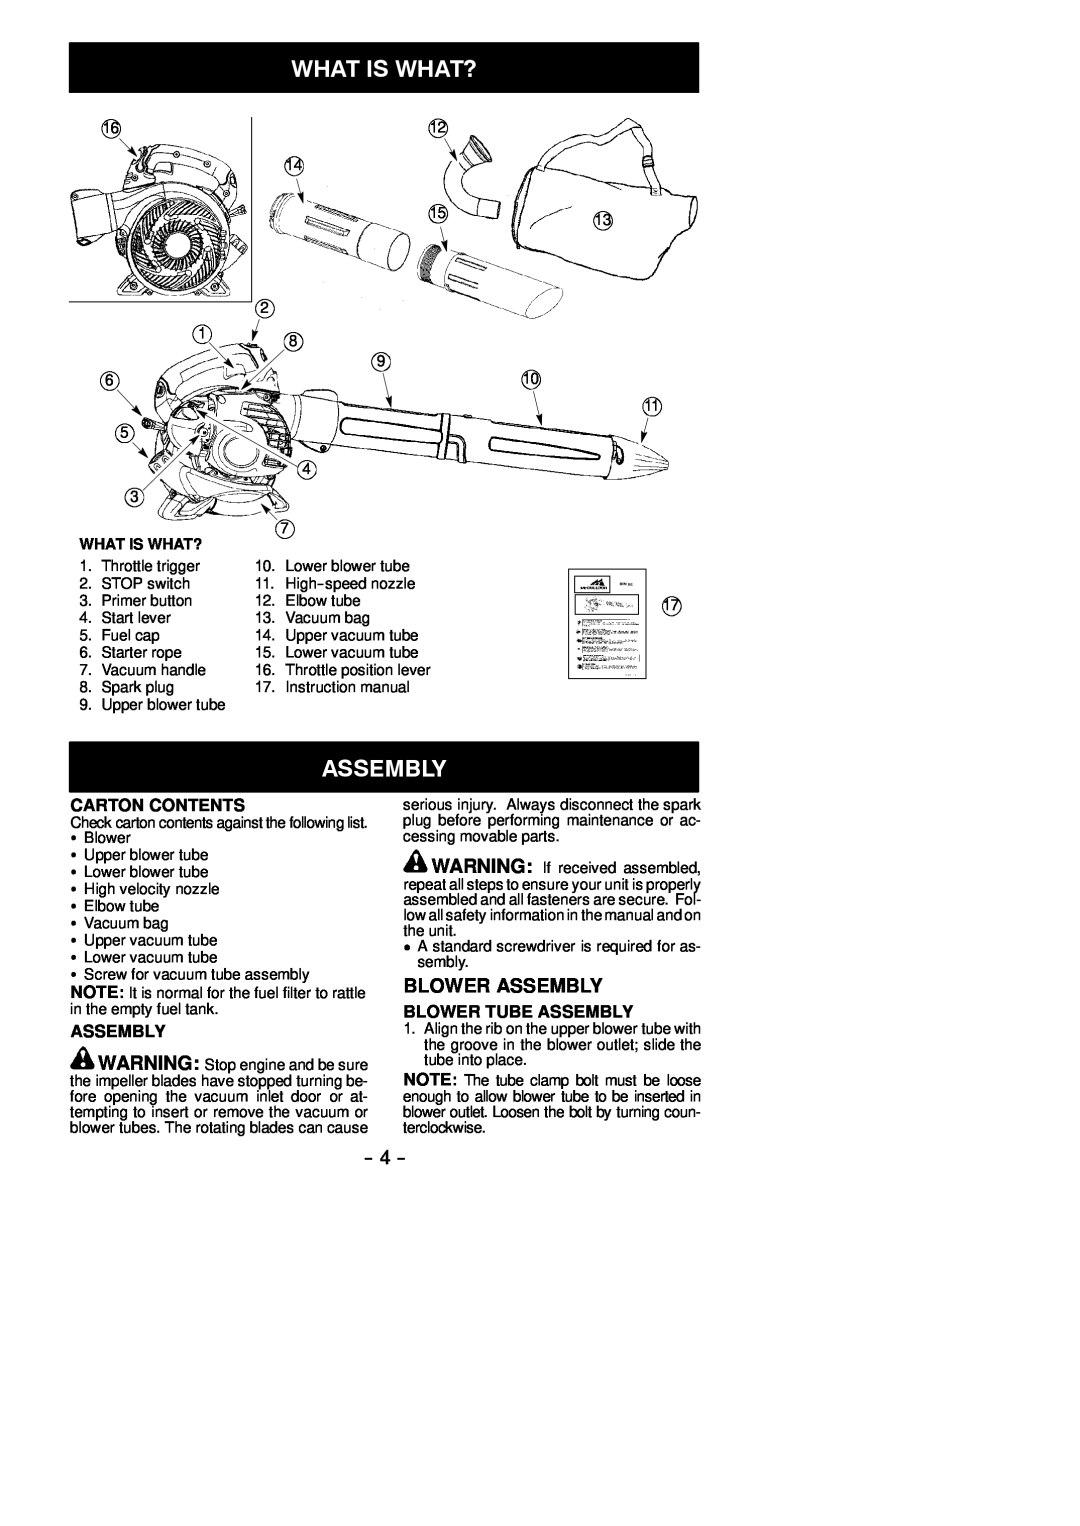 McCulloch MAC GBV 345 instruction manual What Is What?, Blower Assembly, Carton Contents, Blower Tube Assembly 